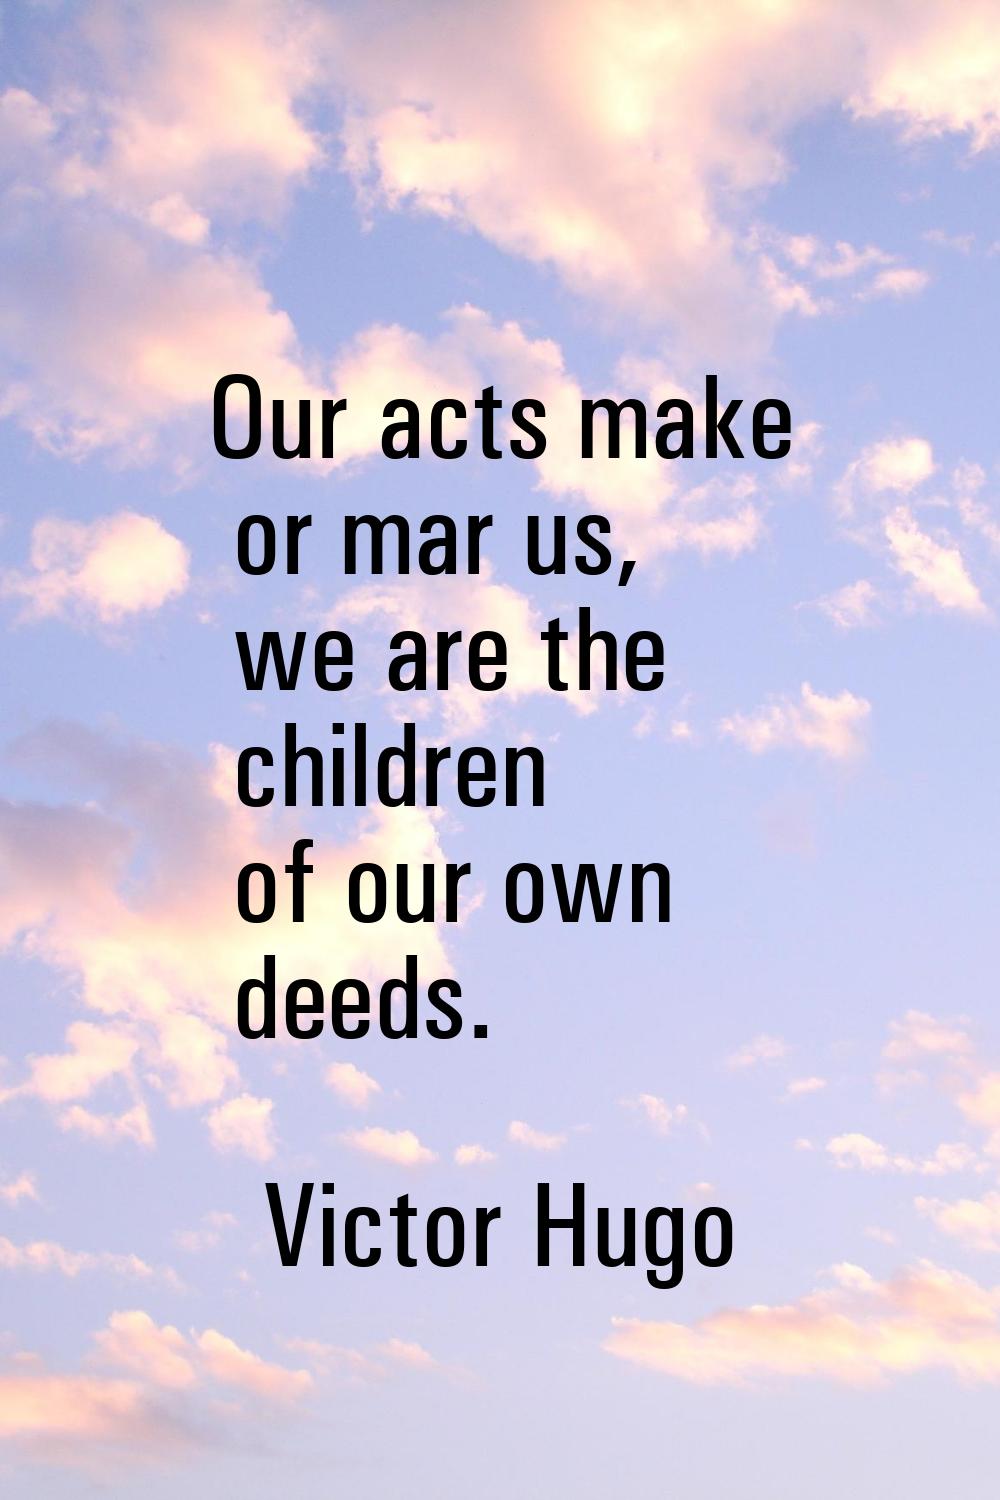 Our acts make or mar us, we are the children of our own deeds.